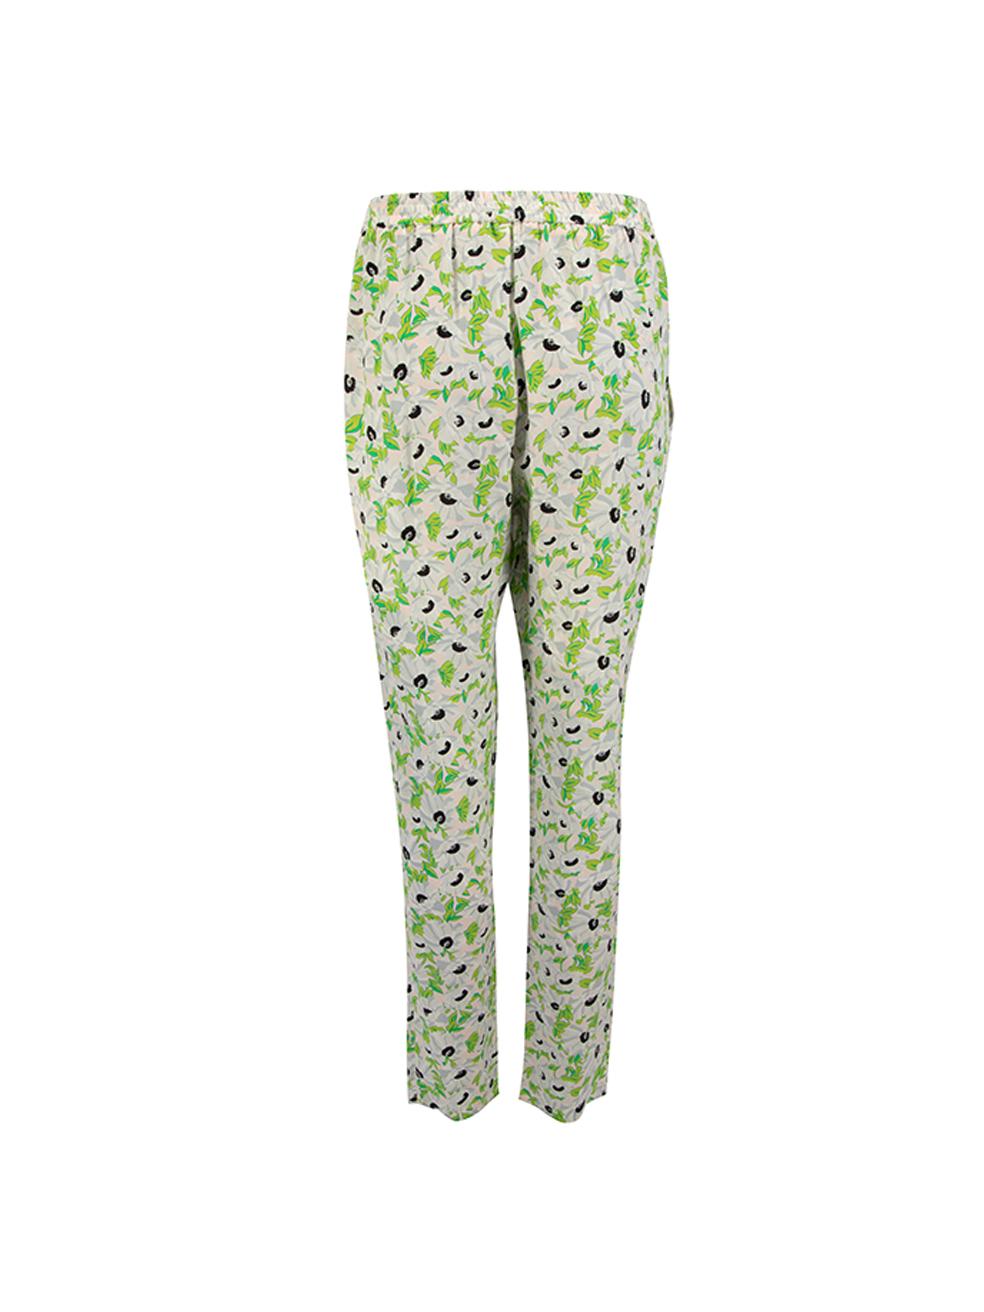 Stella McCartney Women's 2015 Floral Printed Silk Trousers In New Condition For Sale In London, GB